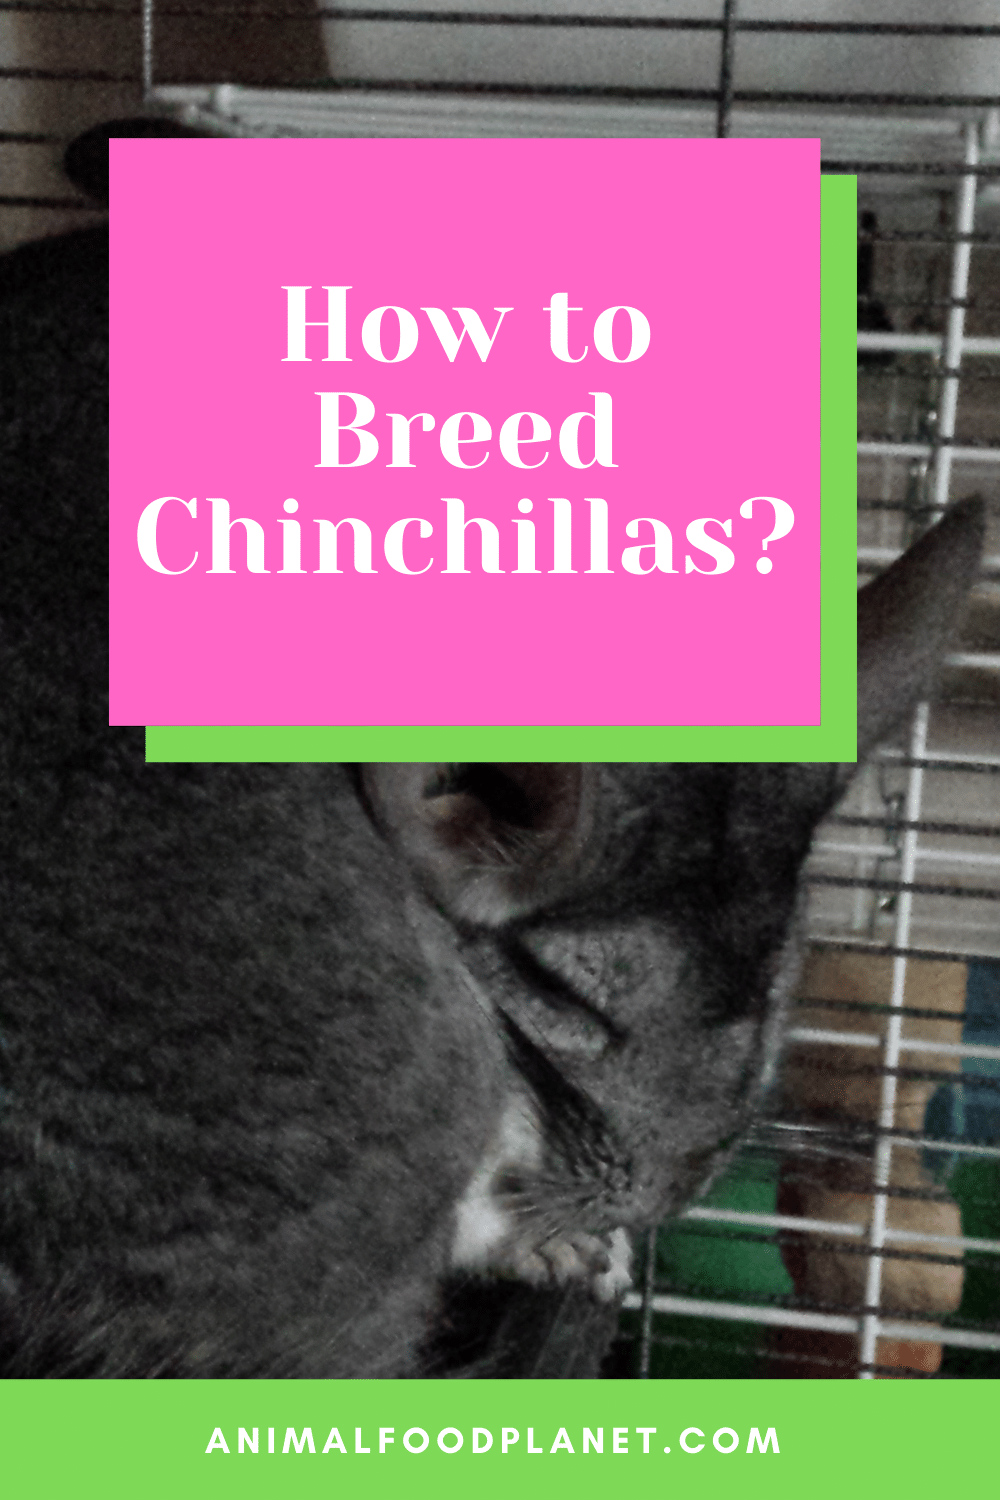 How To Breed Chinchillas